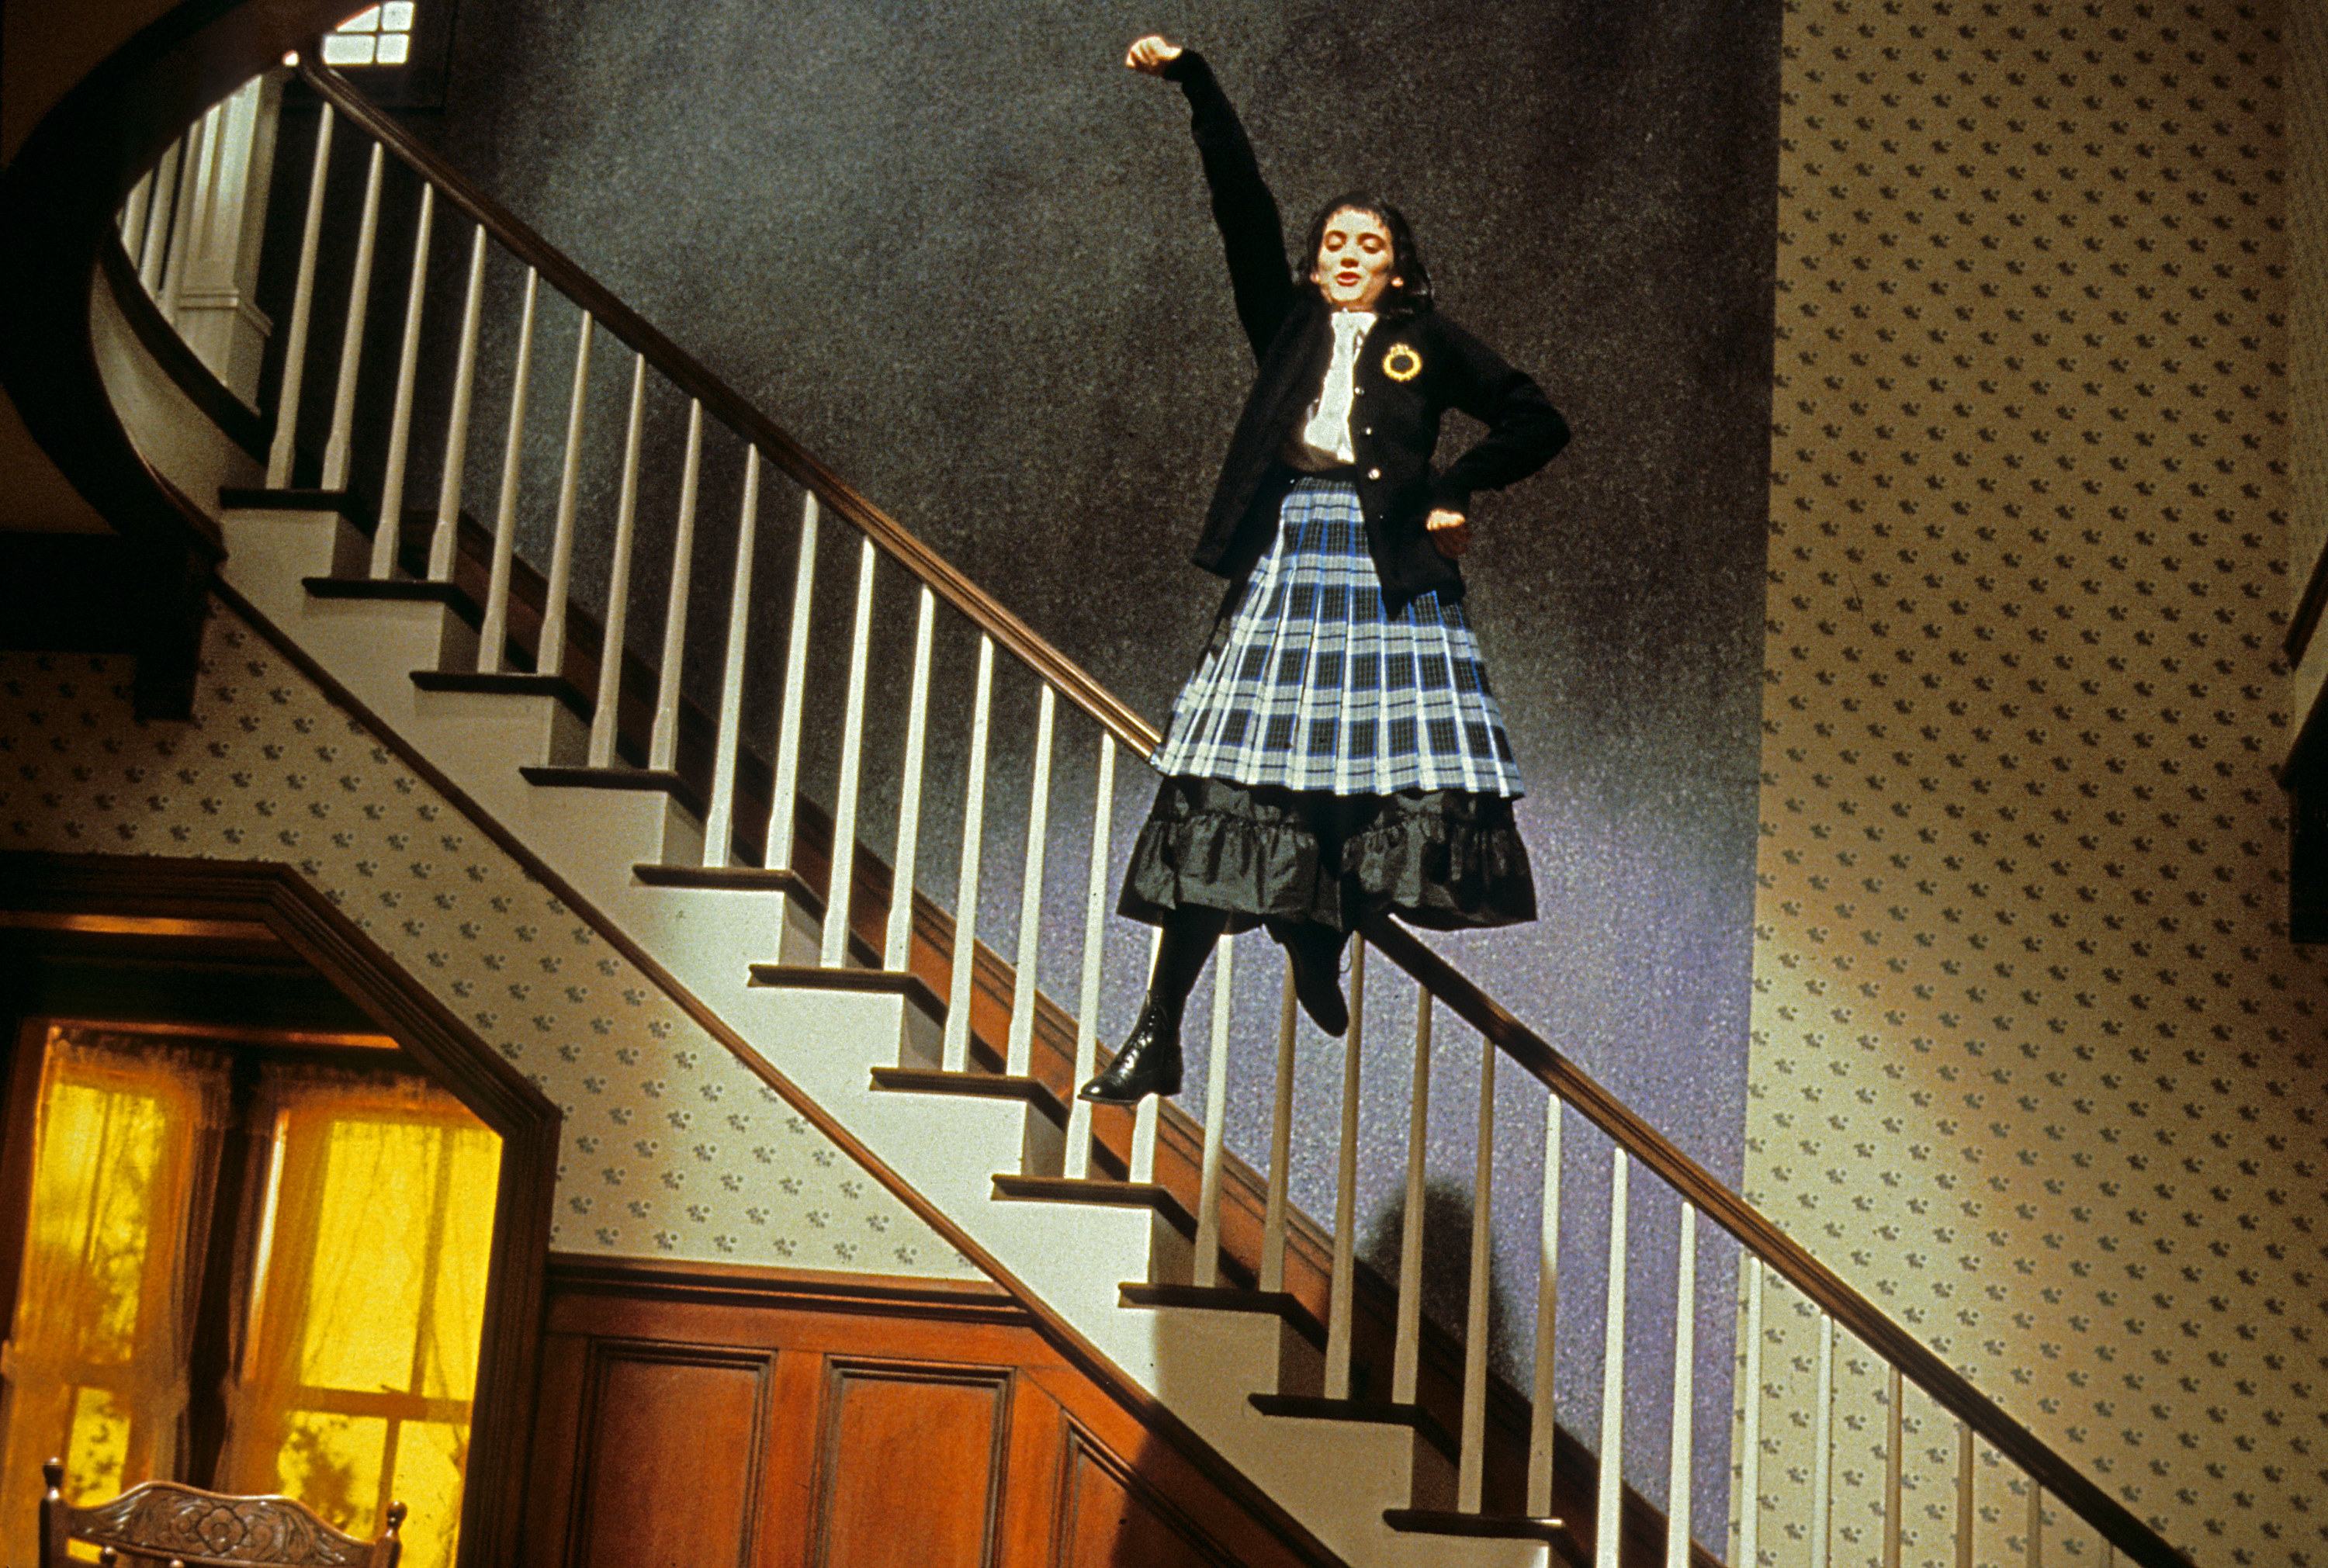 Winona Ryder floating in the air in &quot;Beetlejuice&quot;